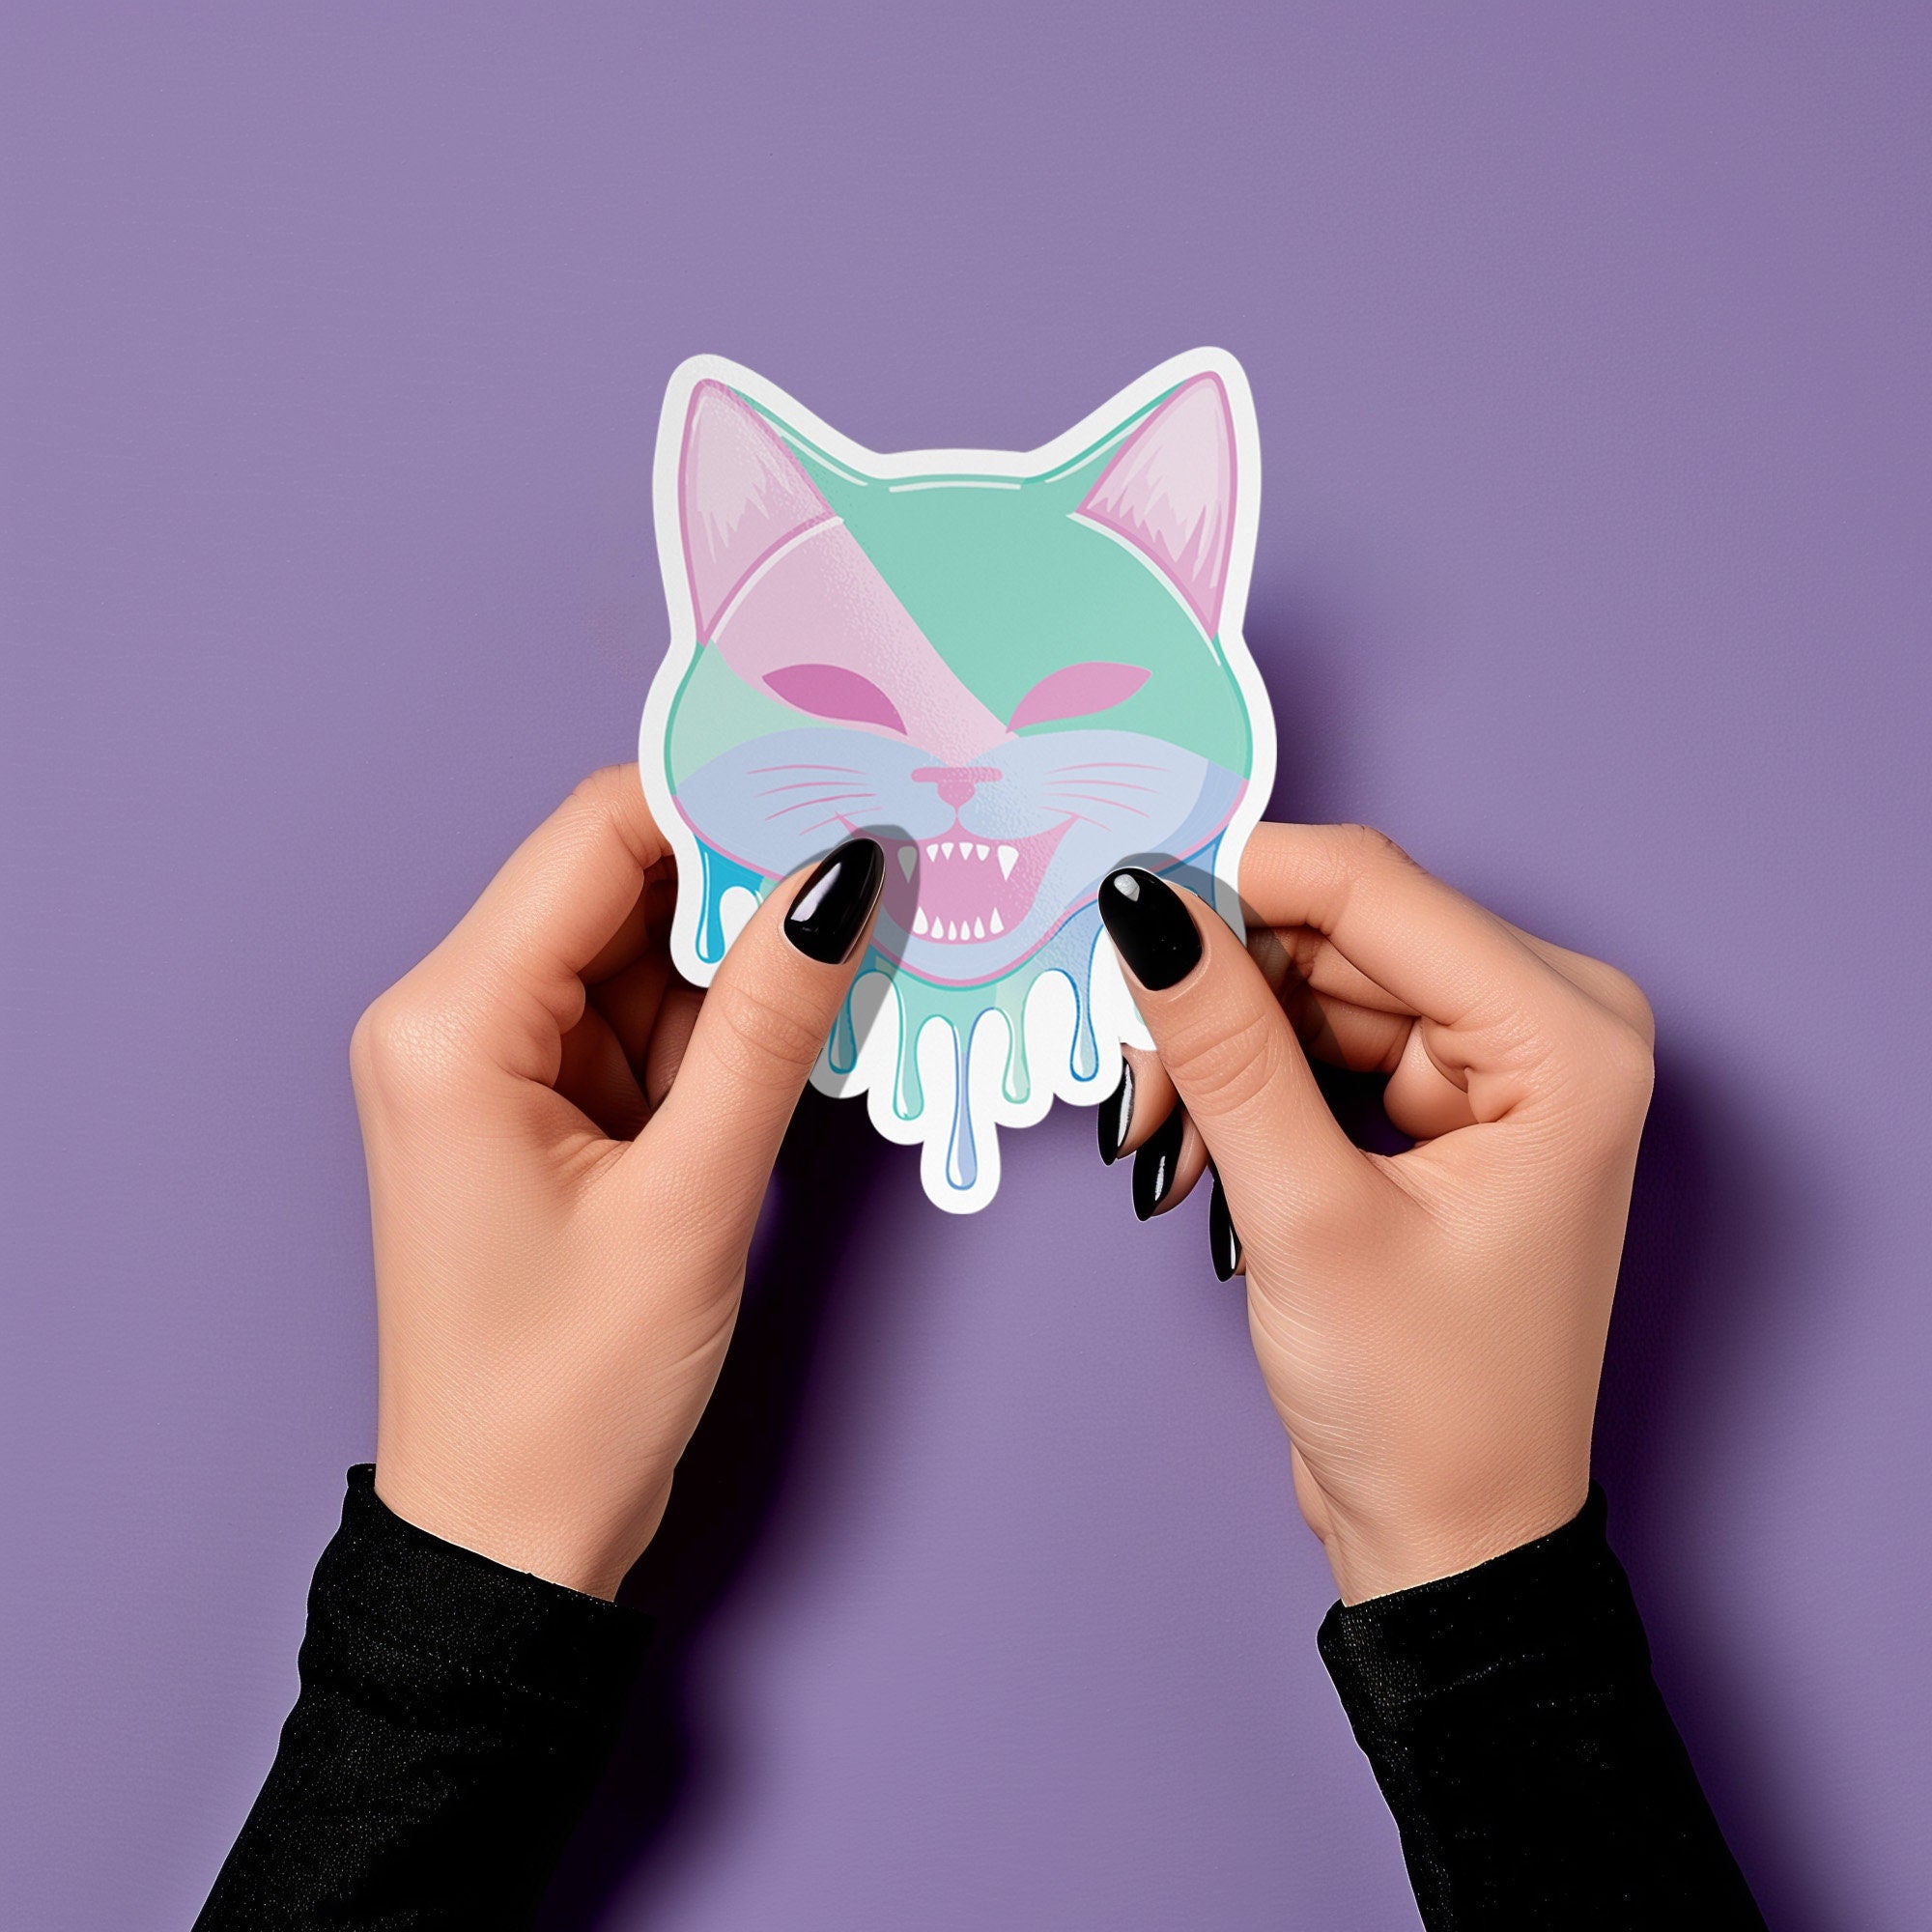 Adorable pastel kitty sticker with a cheeky fanged smile, perfect for adding a playful touch to your accessories. Available in Prism, Gem, and Glitter finishes. Handmade in Austin, Texas.